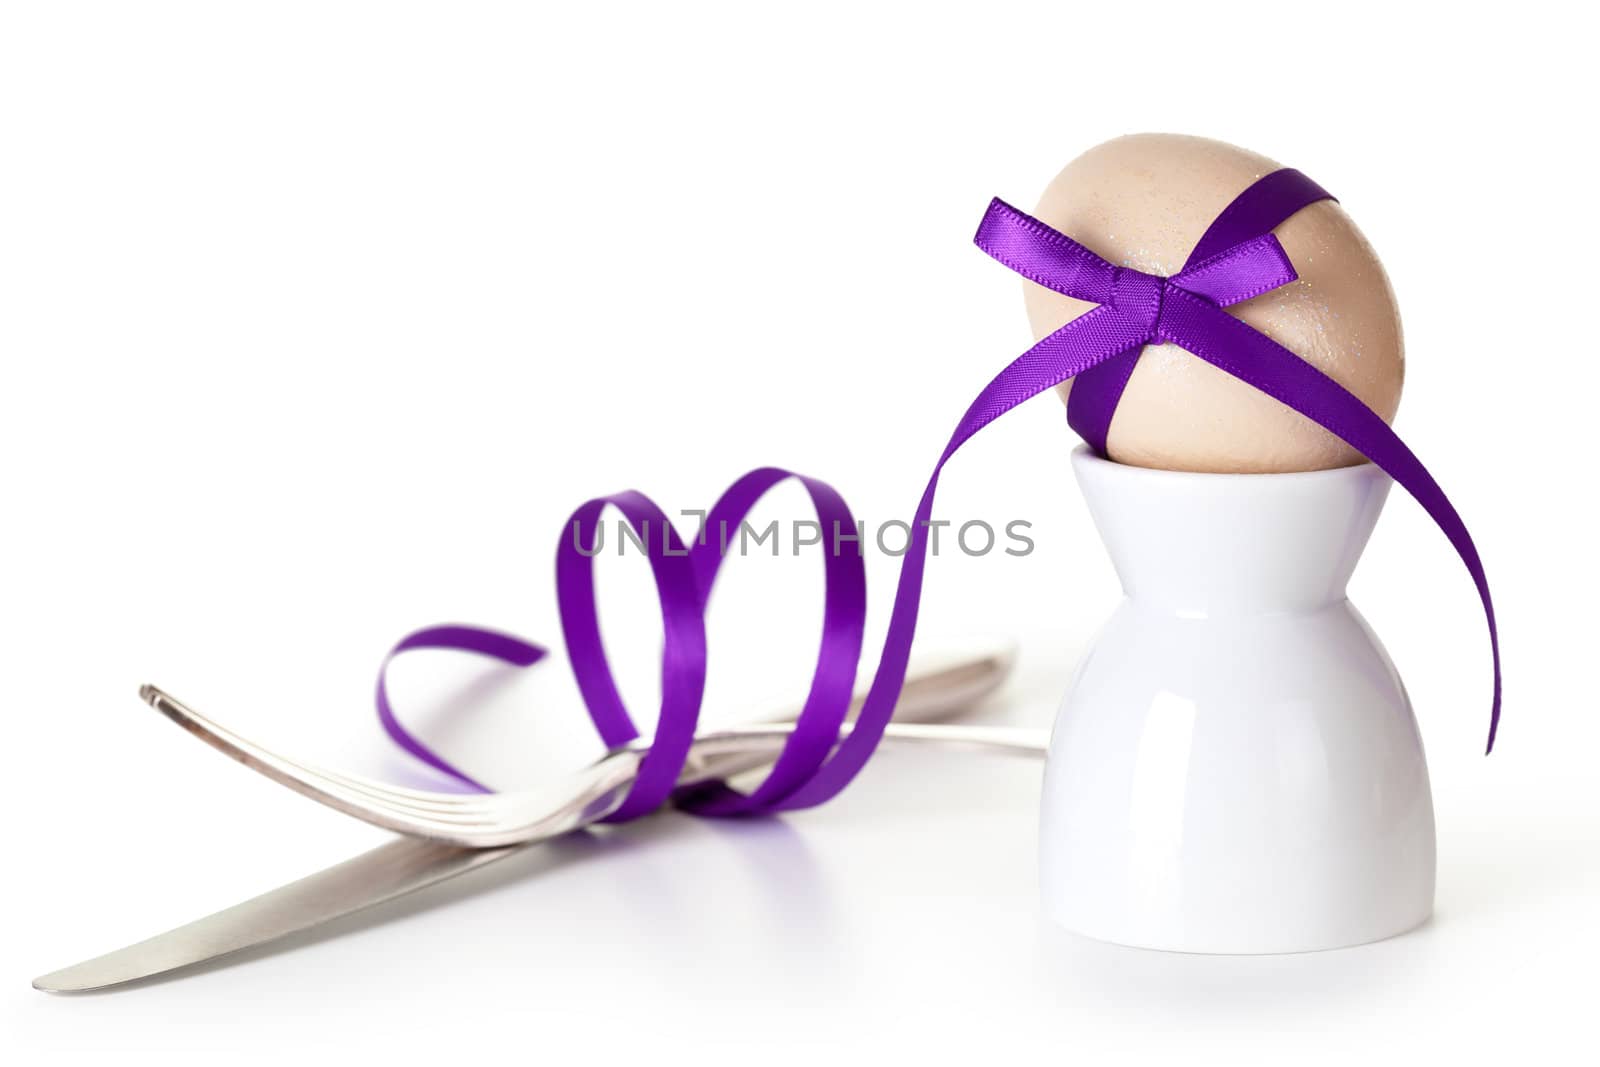 Easter egg with violet ribbon on white background. Composition with cutlery and egg hand painted a beige paint with glitter